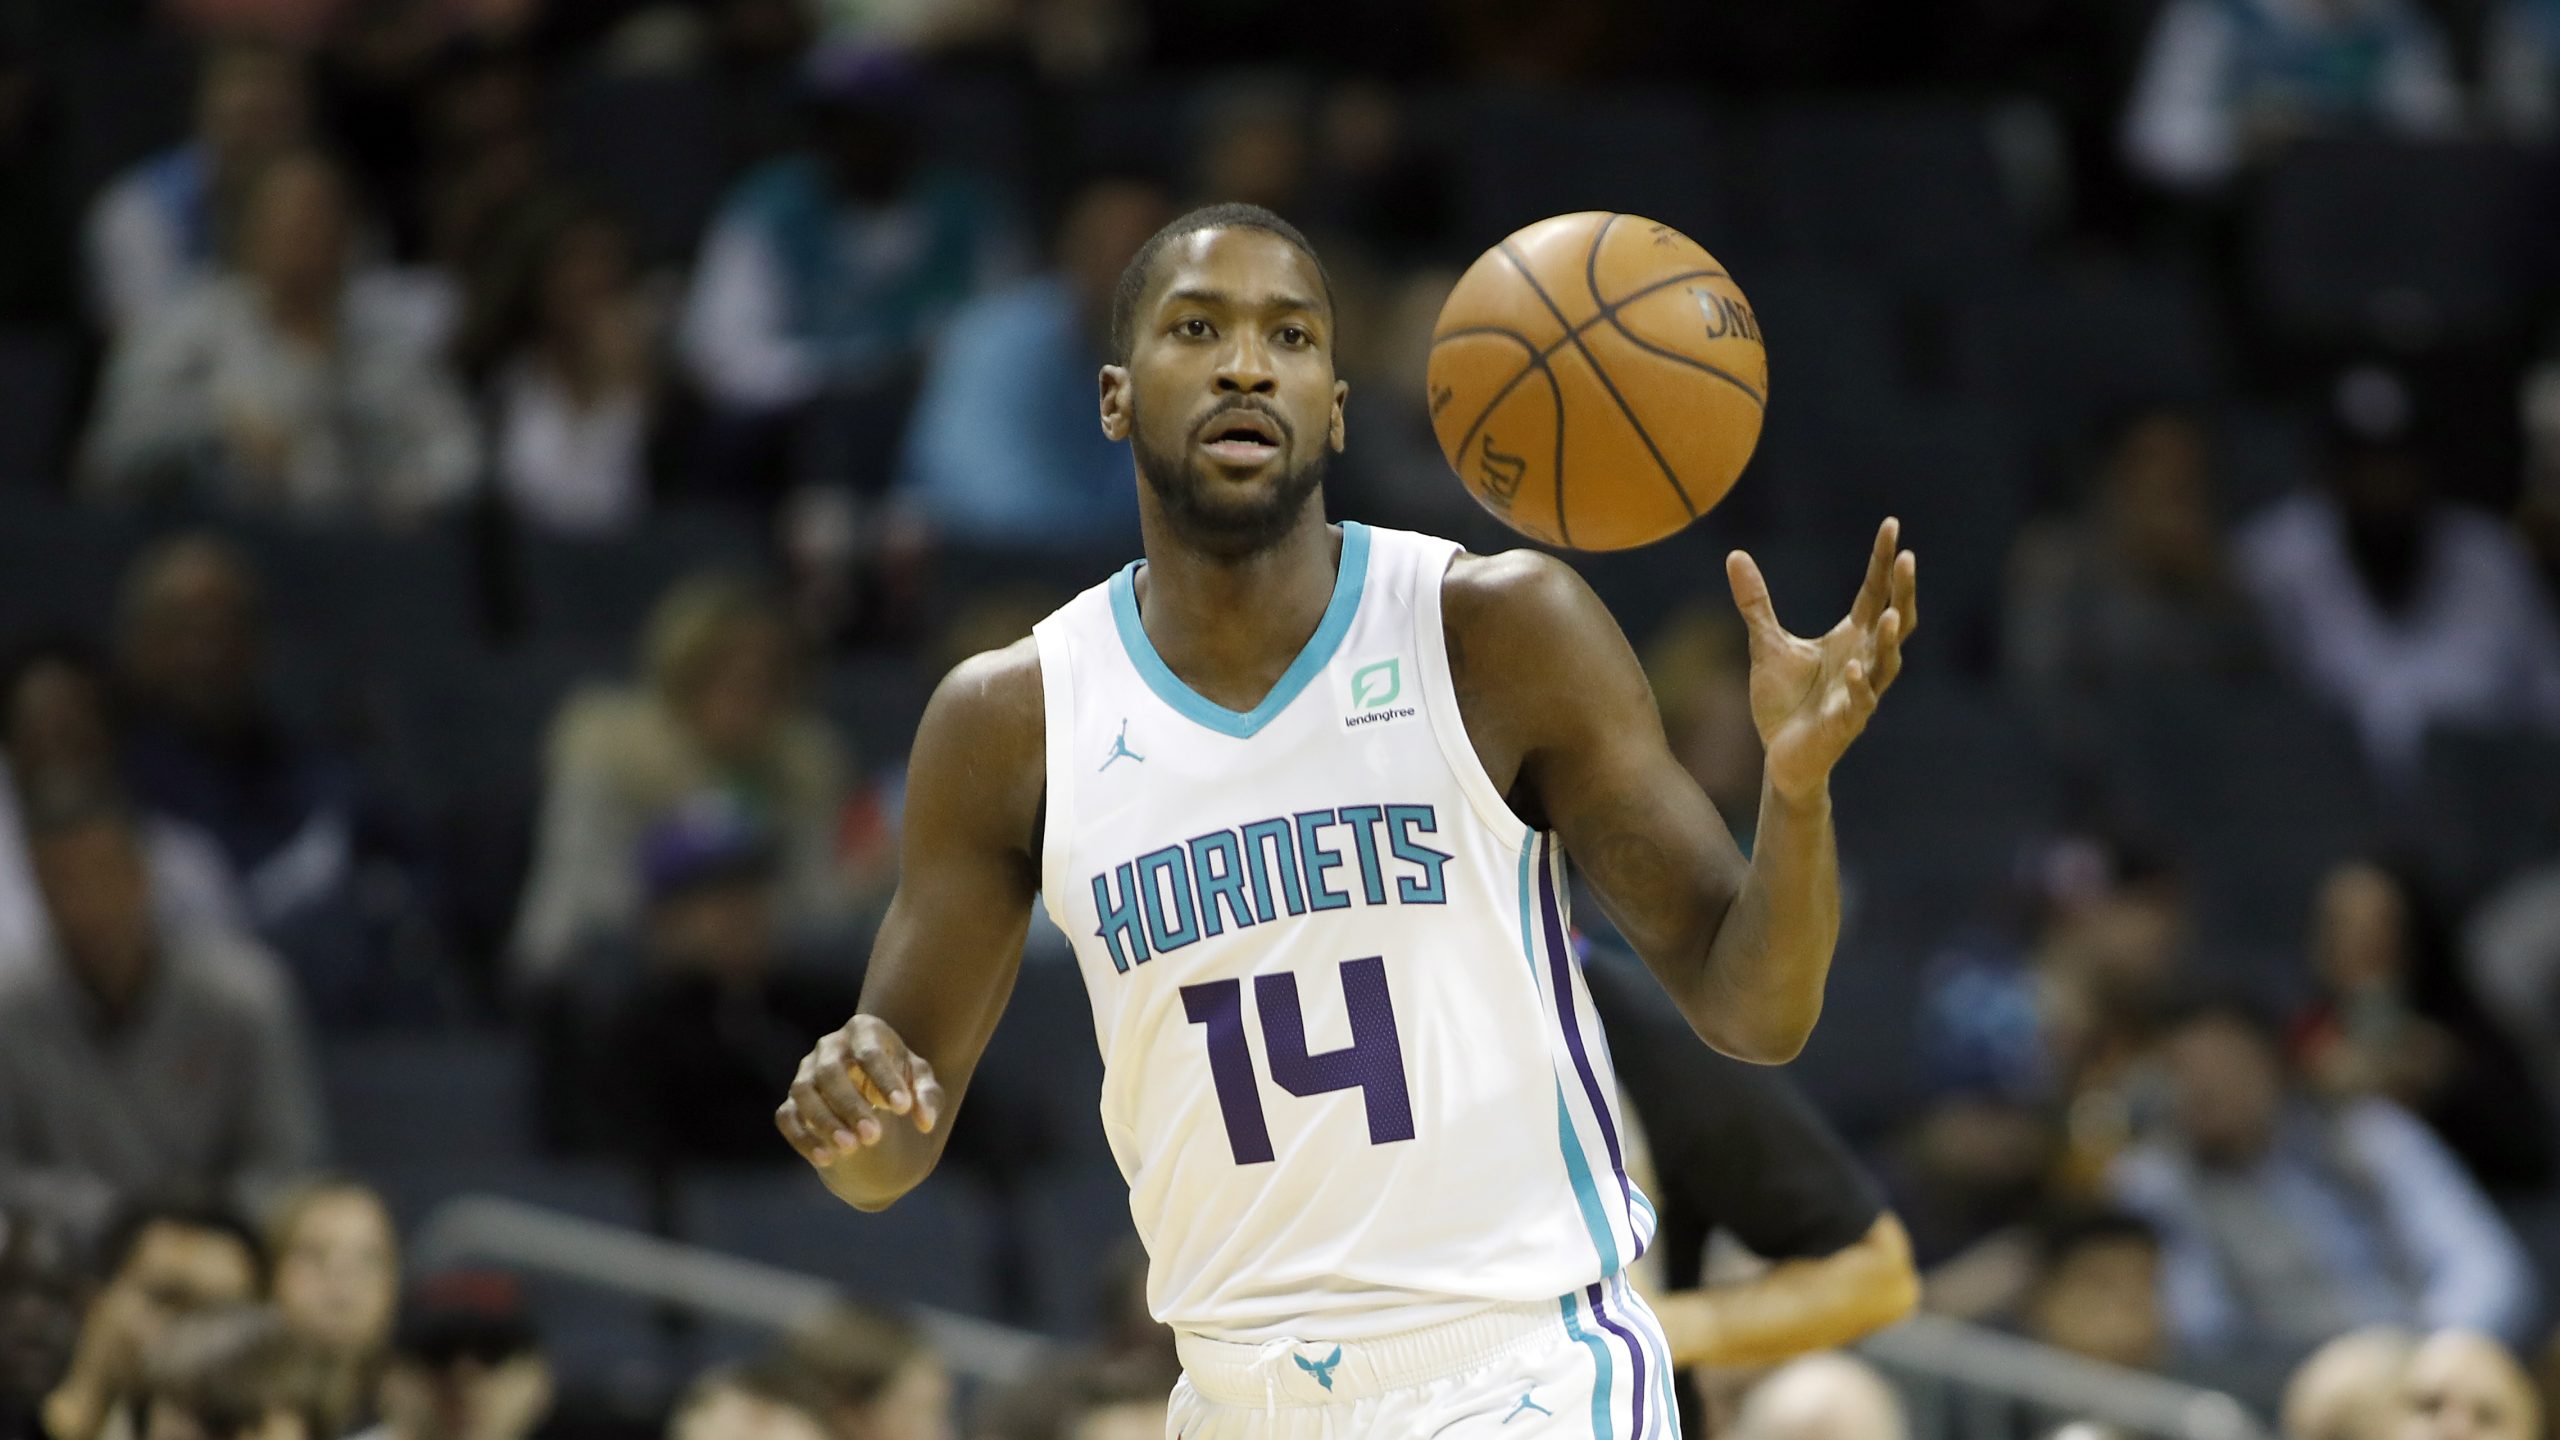 Charlotte Hornets' Michael Kidd-Gilchrist (14) brings the ball up against the Atlanta Hawks during the first half of an NBA basketball game in Charlotte, N.C., Sunday, Dec. 8, 2019. The Hawks won 122-107. (AP Photo/Bob Leverone)